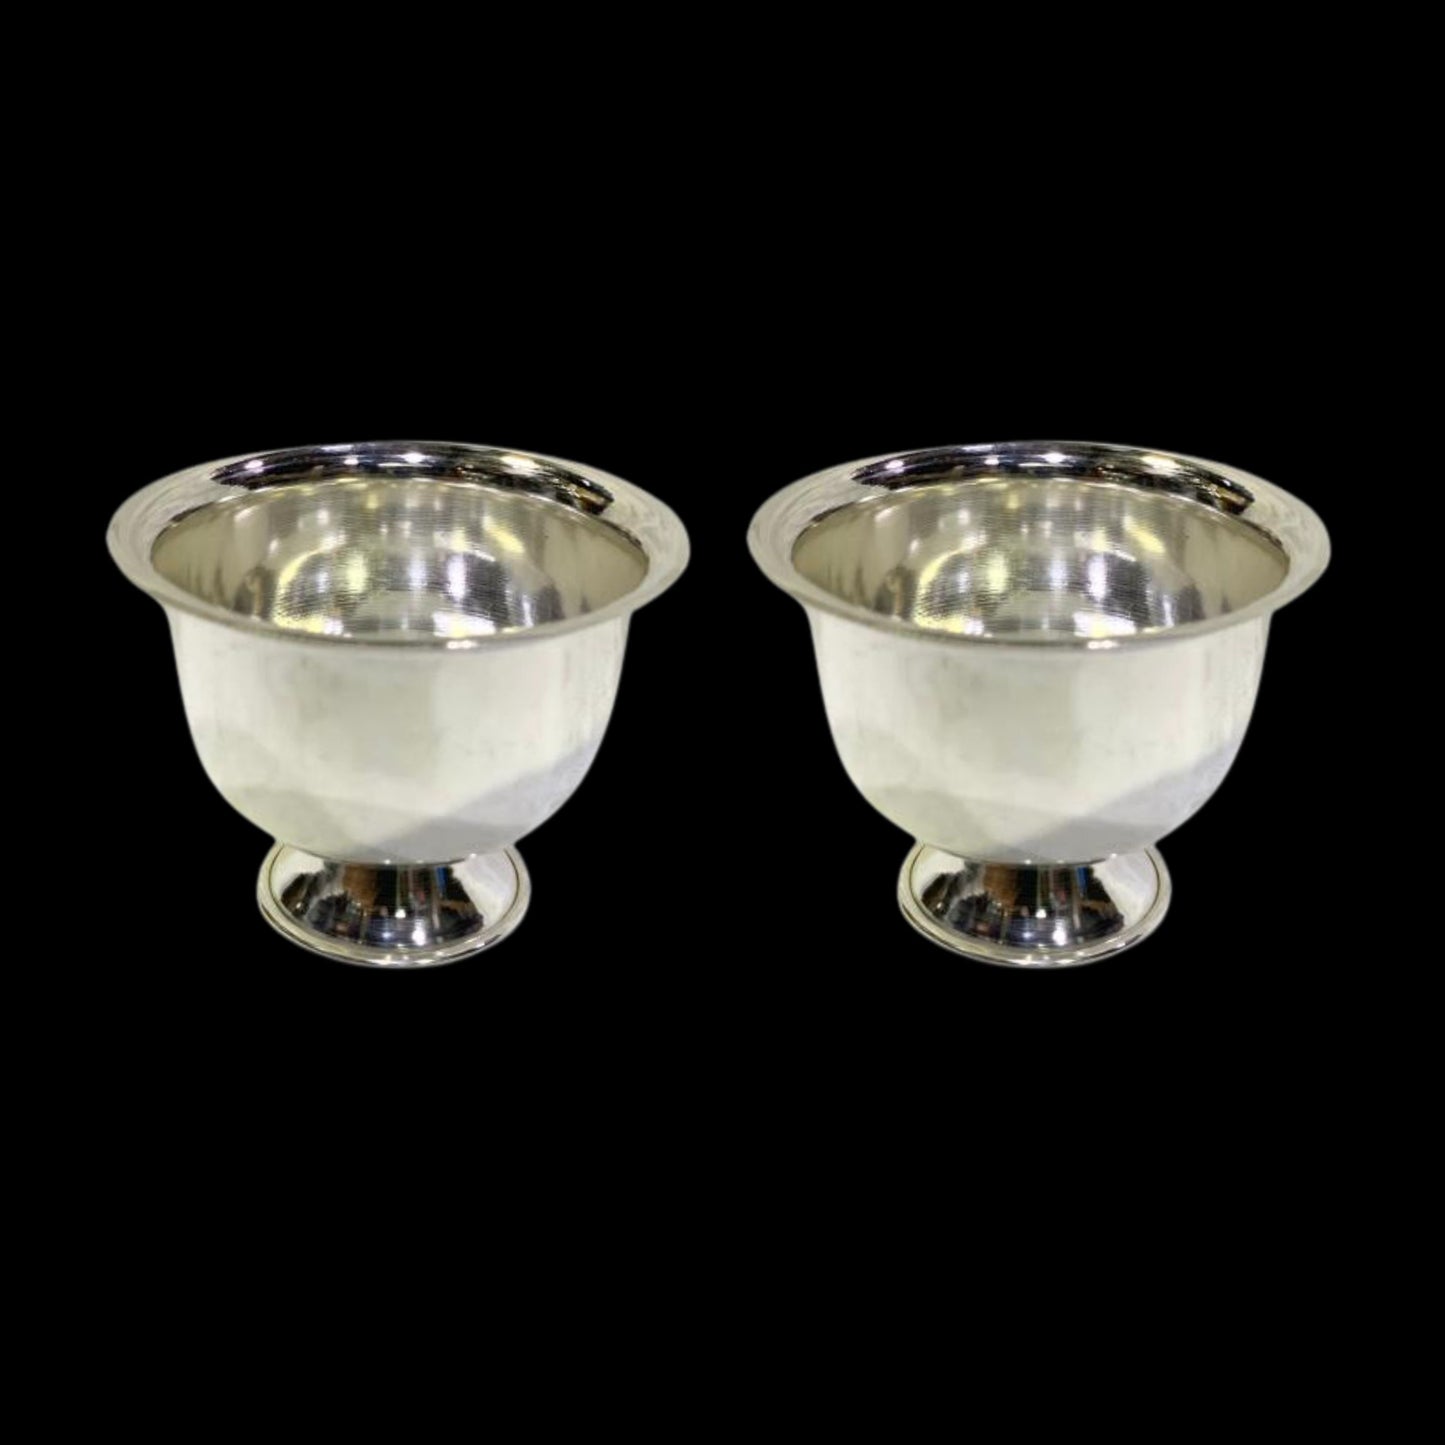 42 gms Pure Silver Padam Cups (Set Of 2) - Mirror Finished